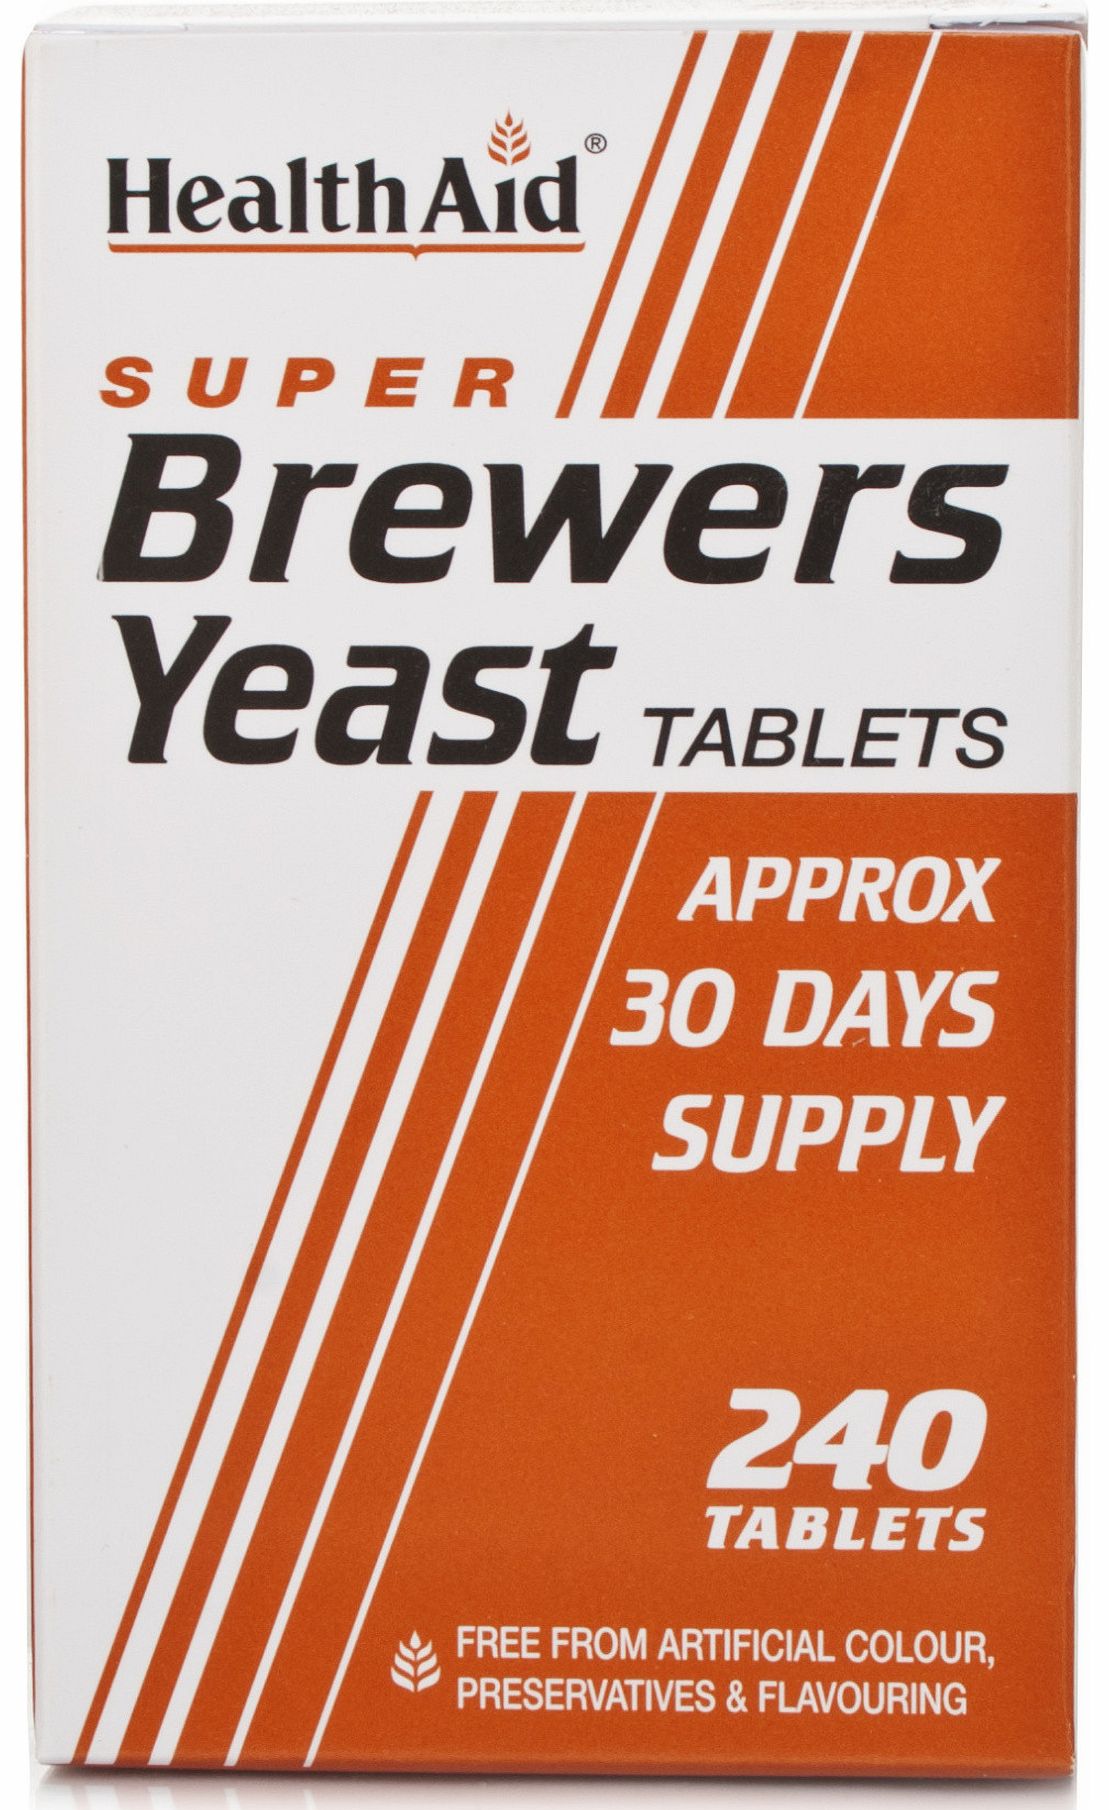 Health Aid Super Brewers Yeast Tablets